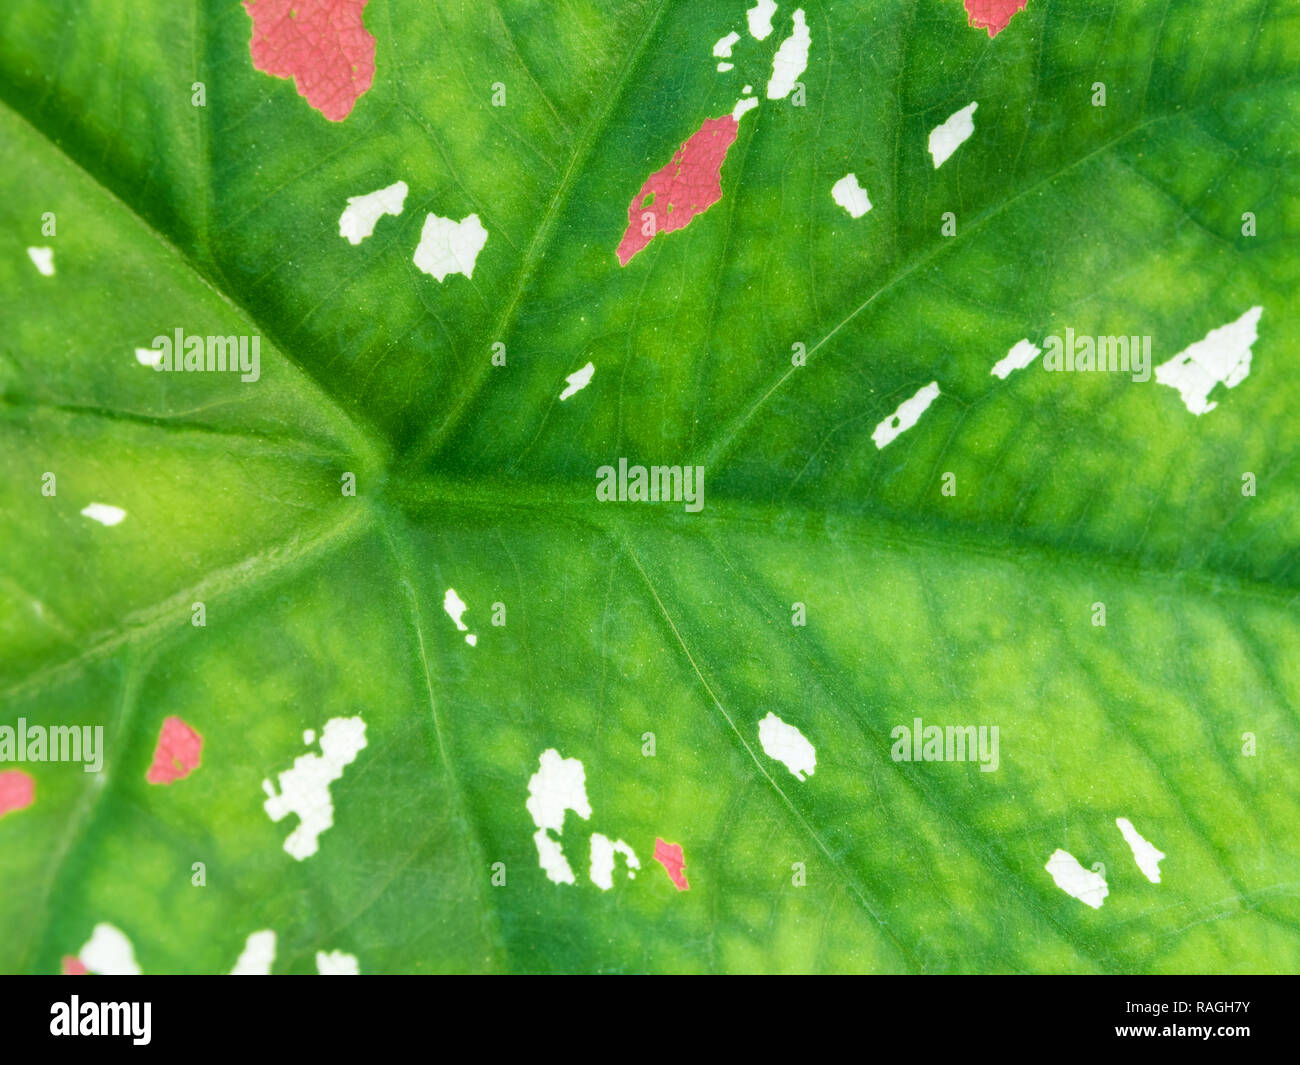 Pink and white freckles on green surface of Caladium Bicolour leaf Stock Photo